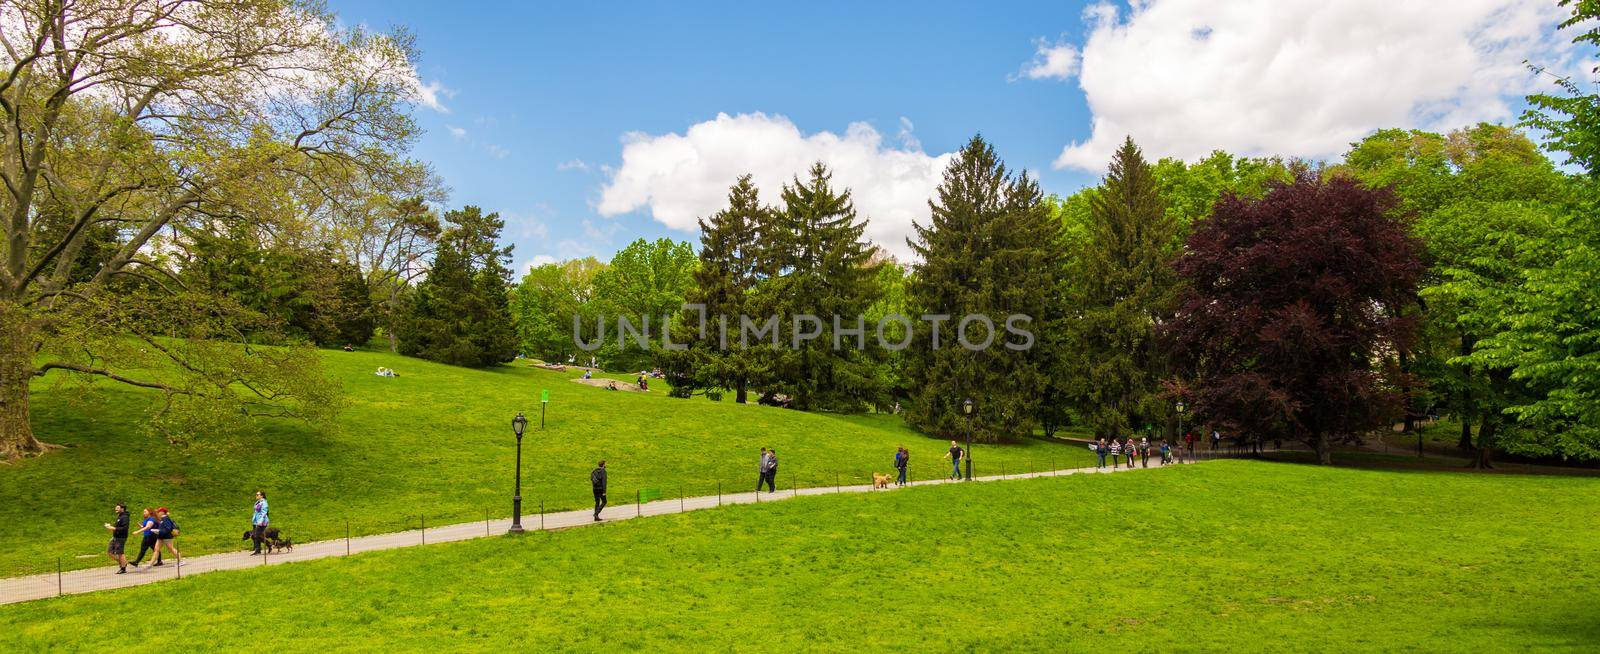 New York, USA - May 15, 2019: Central park at a sunny day in Manhattan, New York City, USA